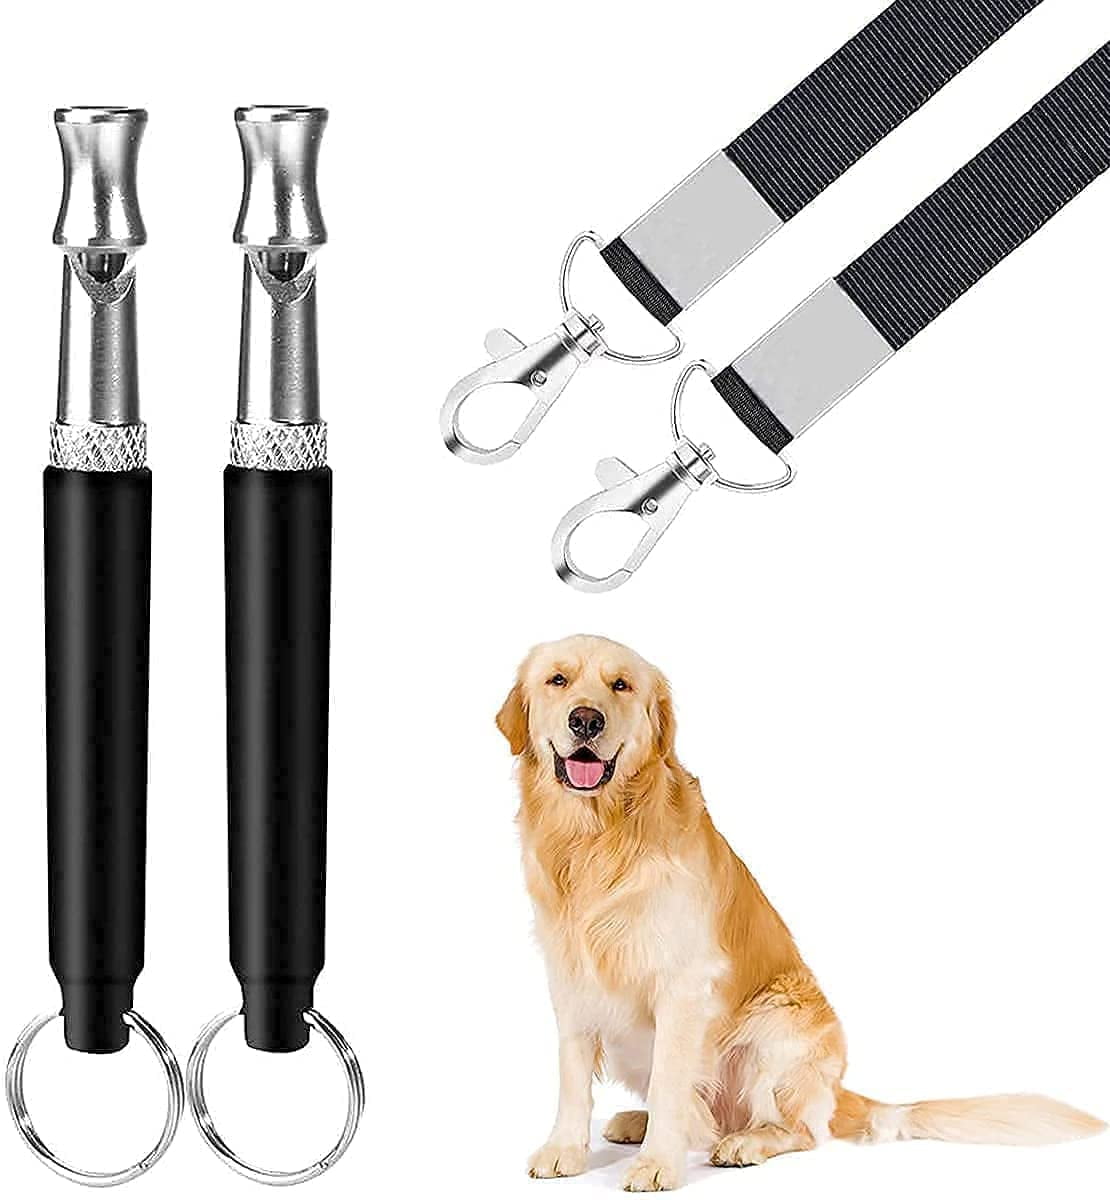 Garden-one Dog Whistle Professional Dog Training Whistle to Stop Barking,Professional Ultrasonic Adjustable High Pitch Ultra Sonic Sound Tool with Free Premium Quality Lanyard Strap 